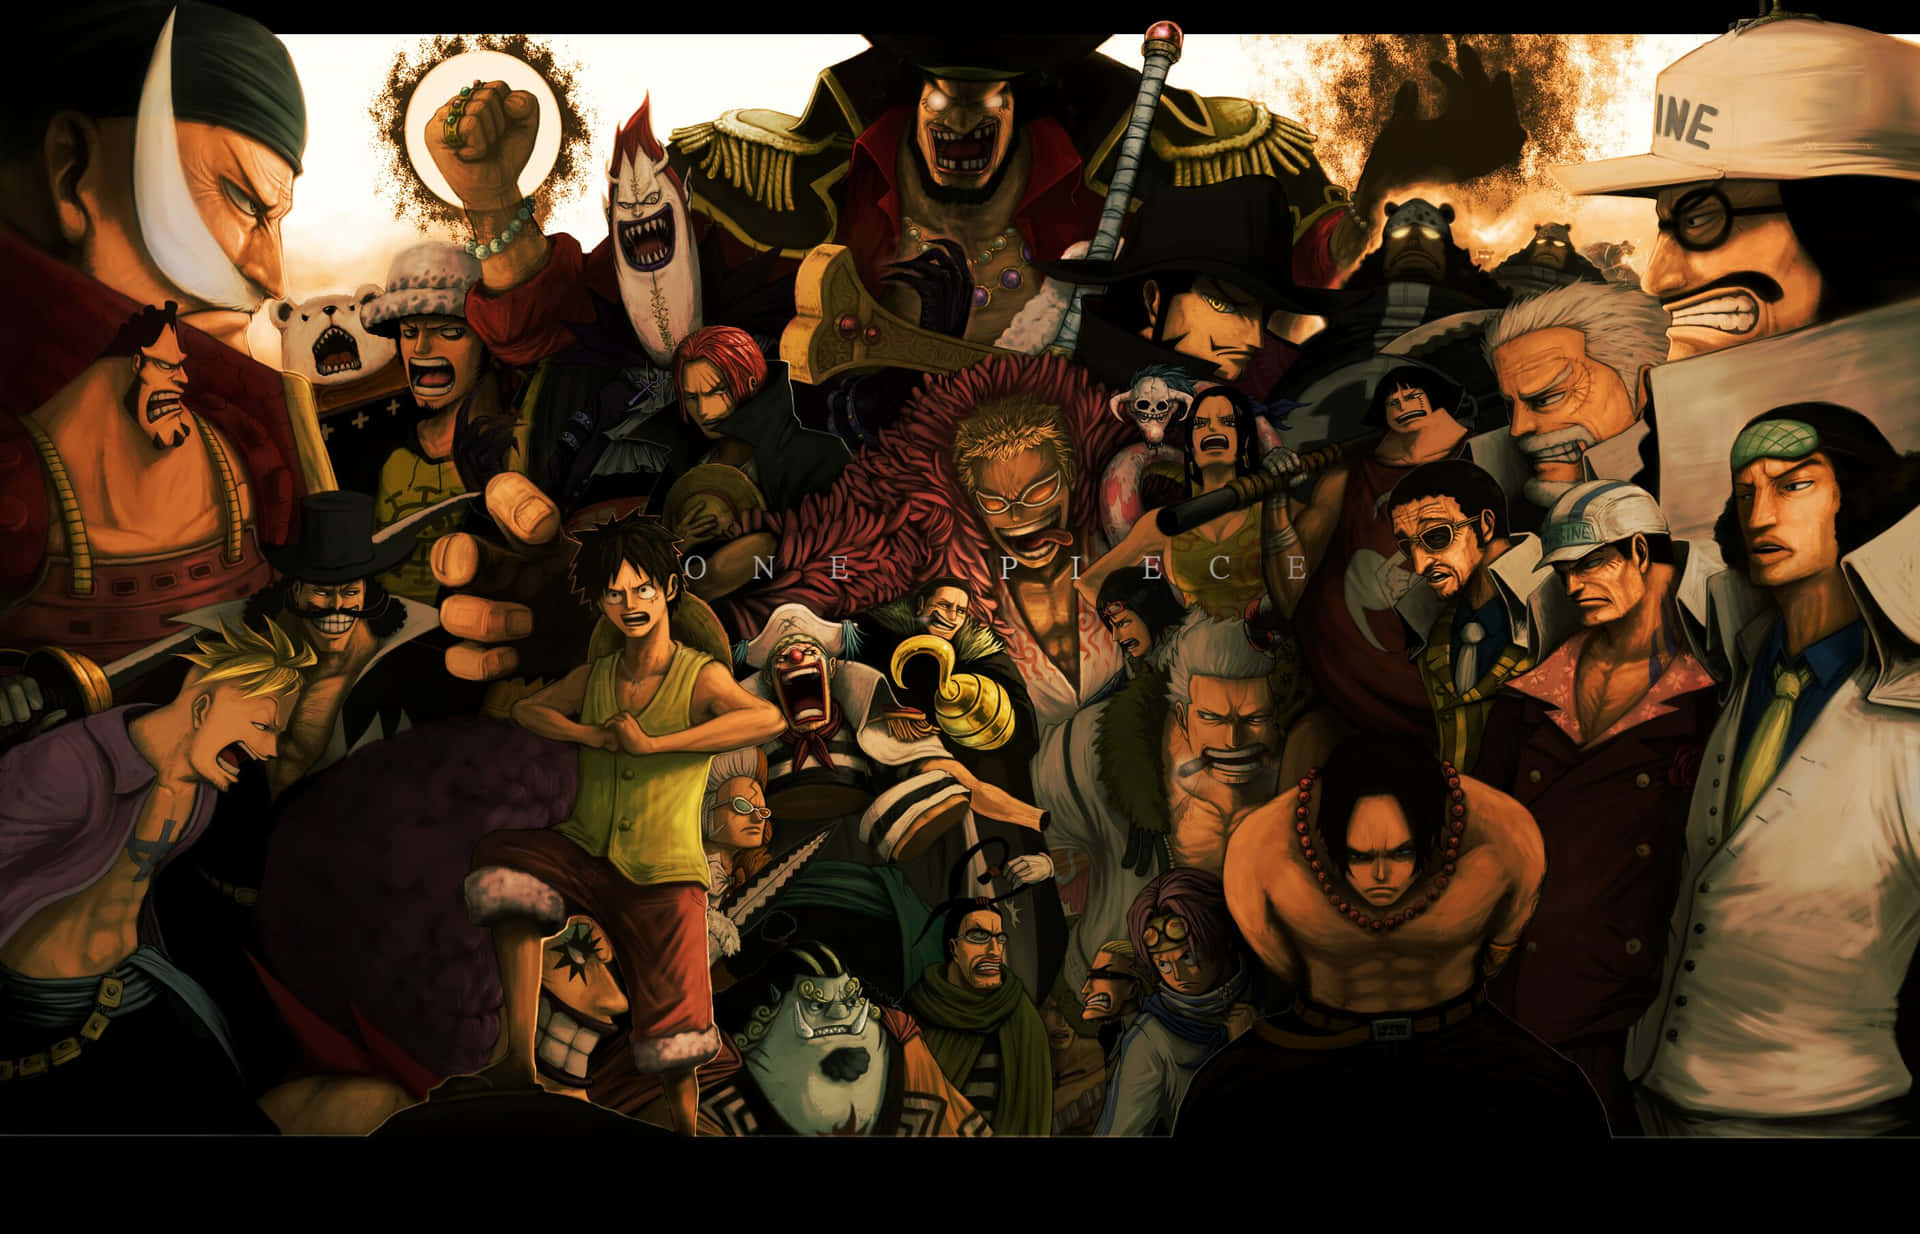 "Inside Impel Down, the infamous prison for powerful criminals" Wallpaper